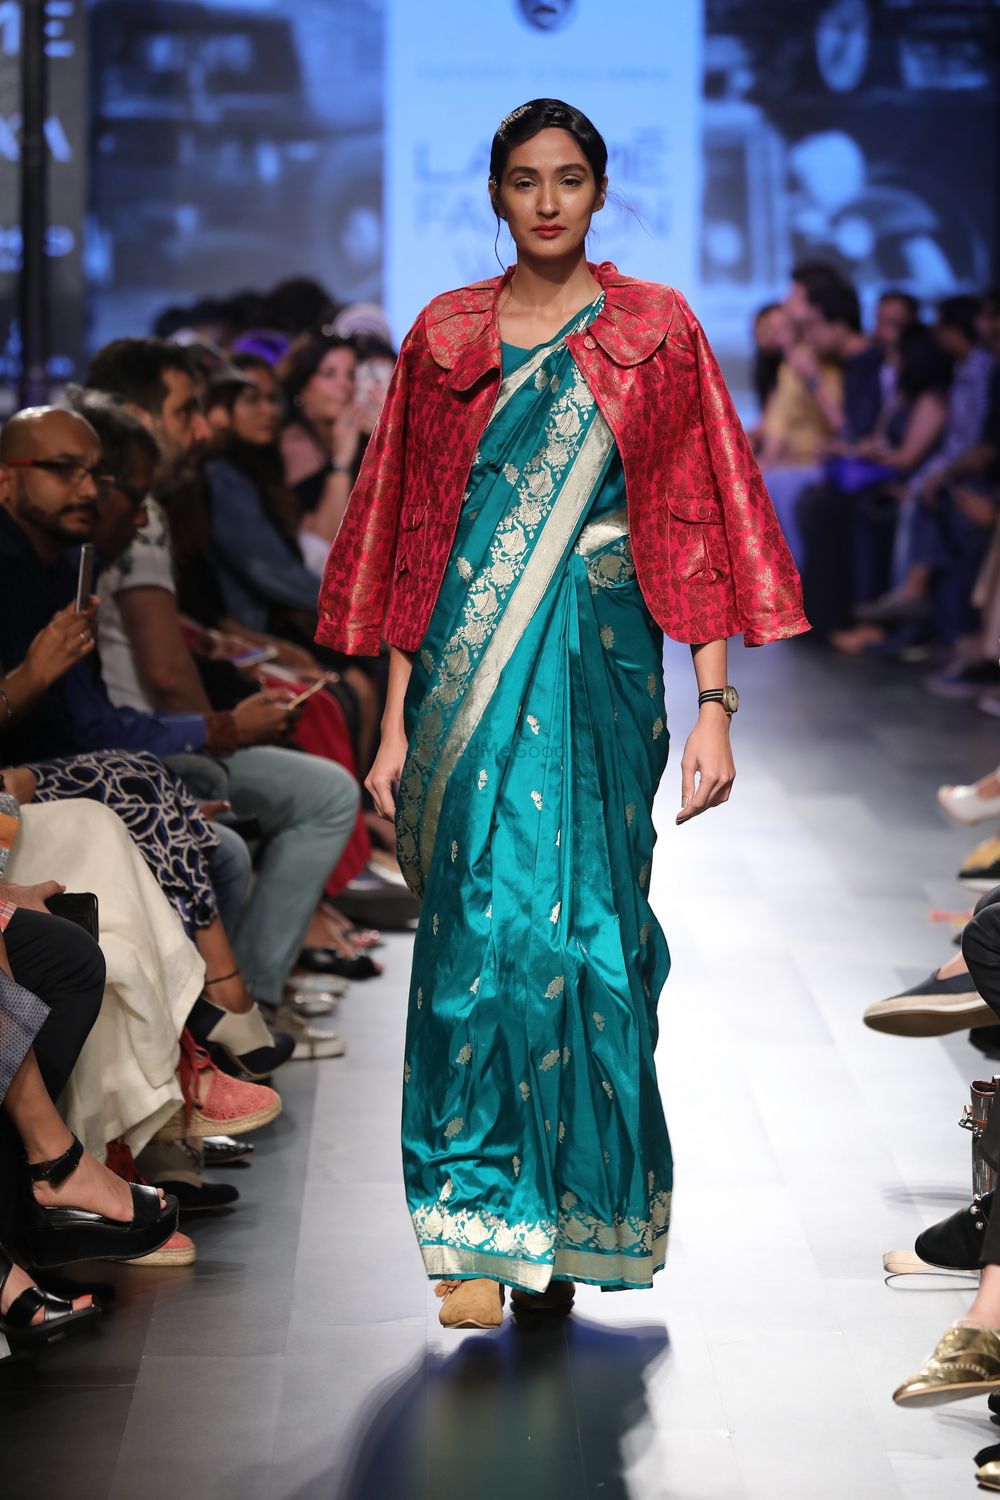 Photo From LFW Winter Rose Collection - By Sailesh Singhania